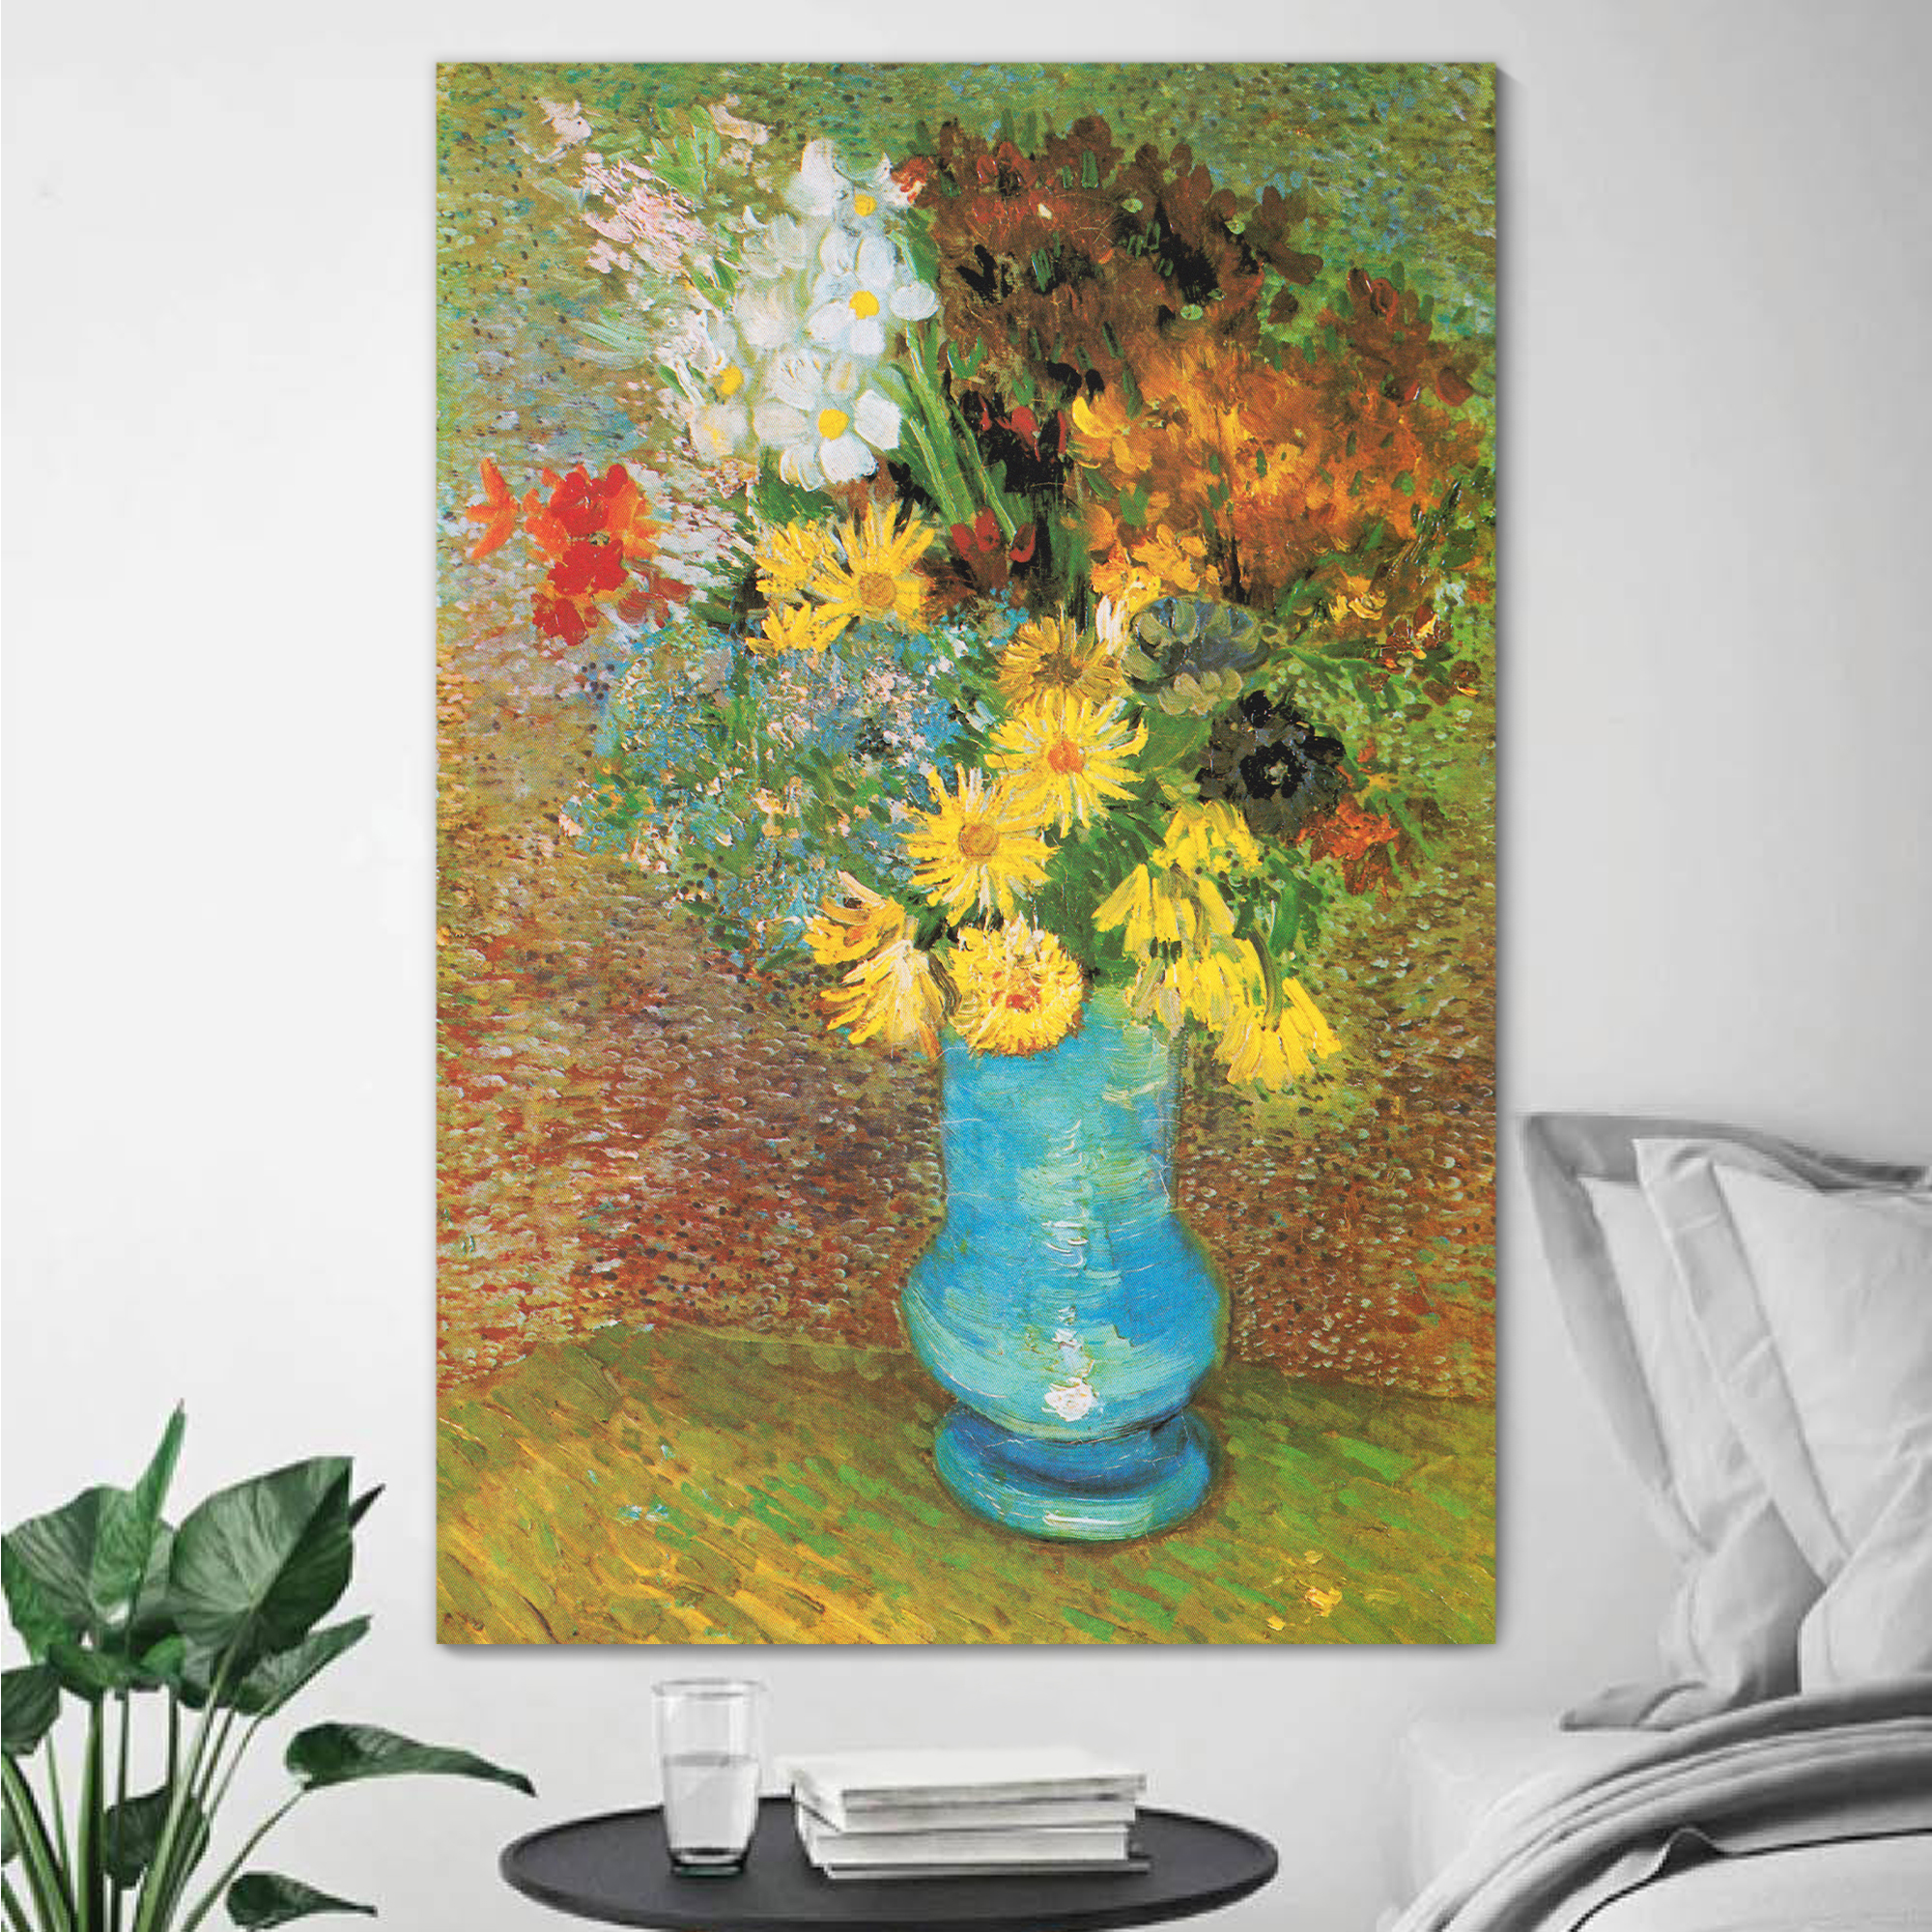 Flowers in a Blue Vase, 1887 by Vincent Van Gogh - Canvas Print Wall Art Famous Oil Painting Reproduction - 24